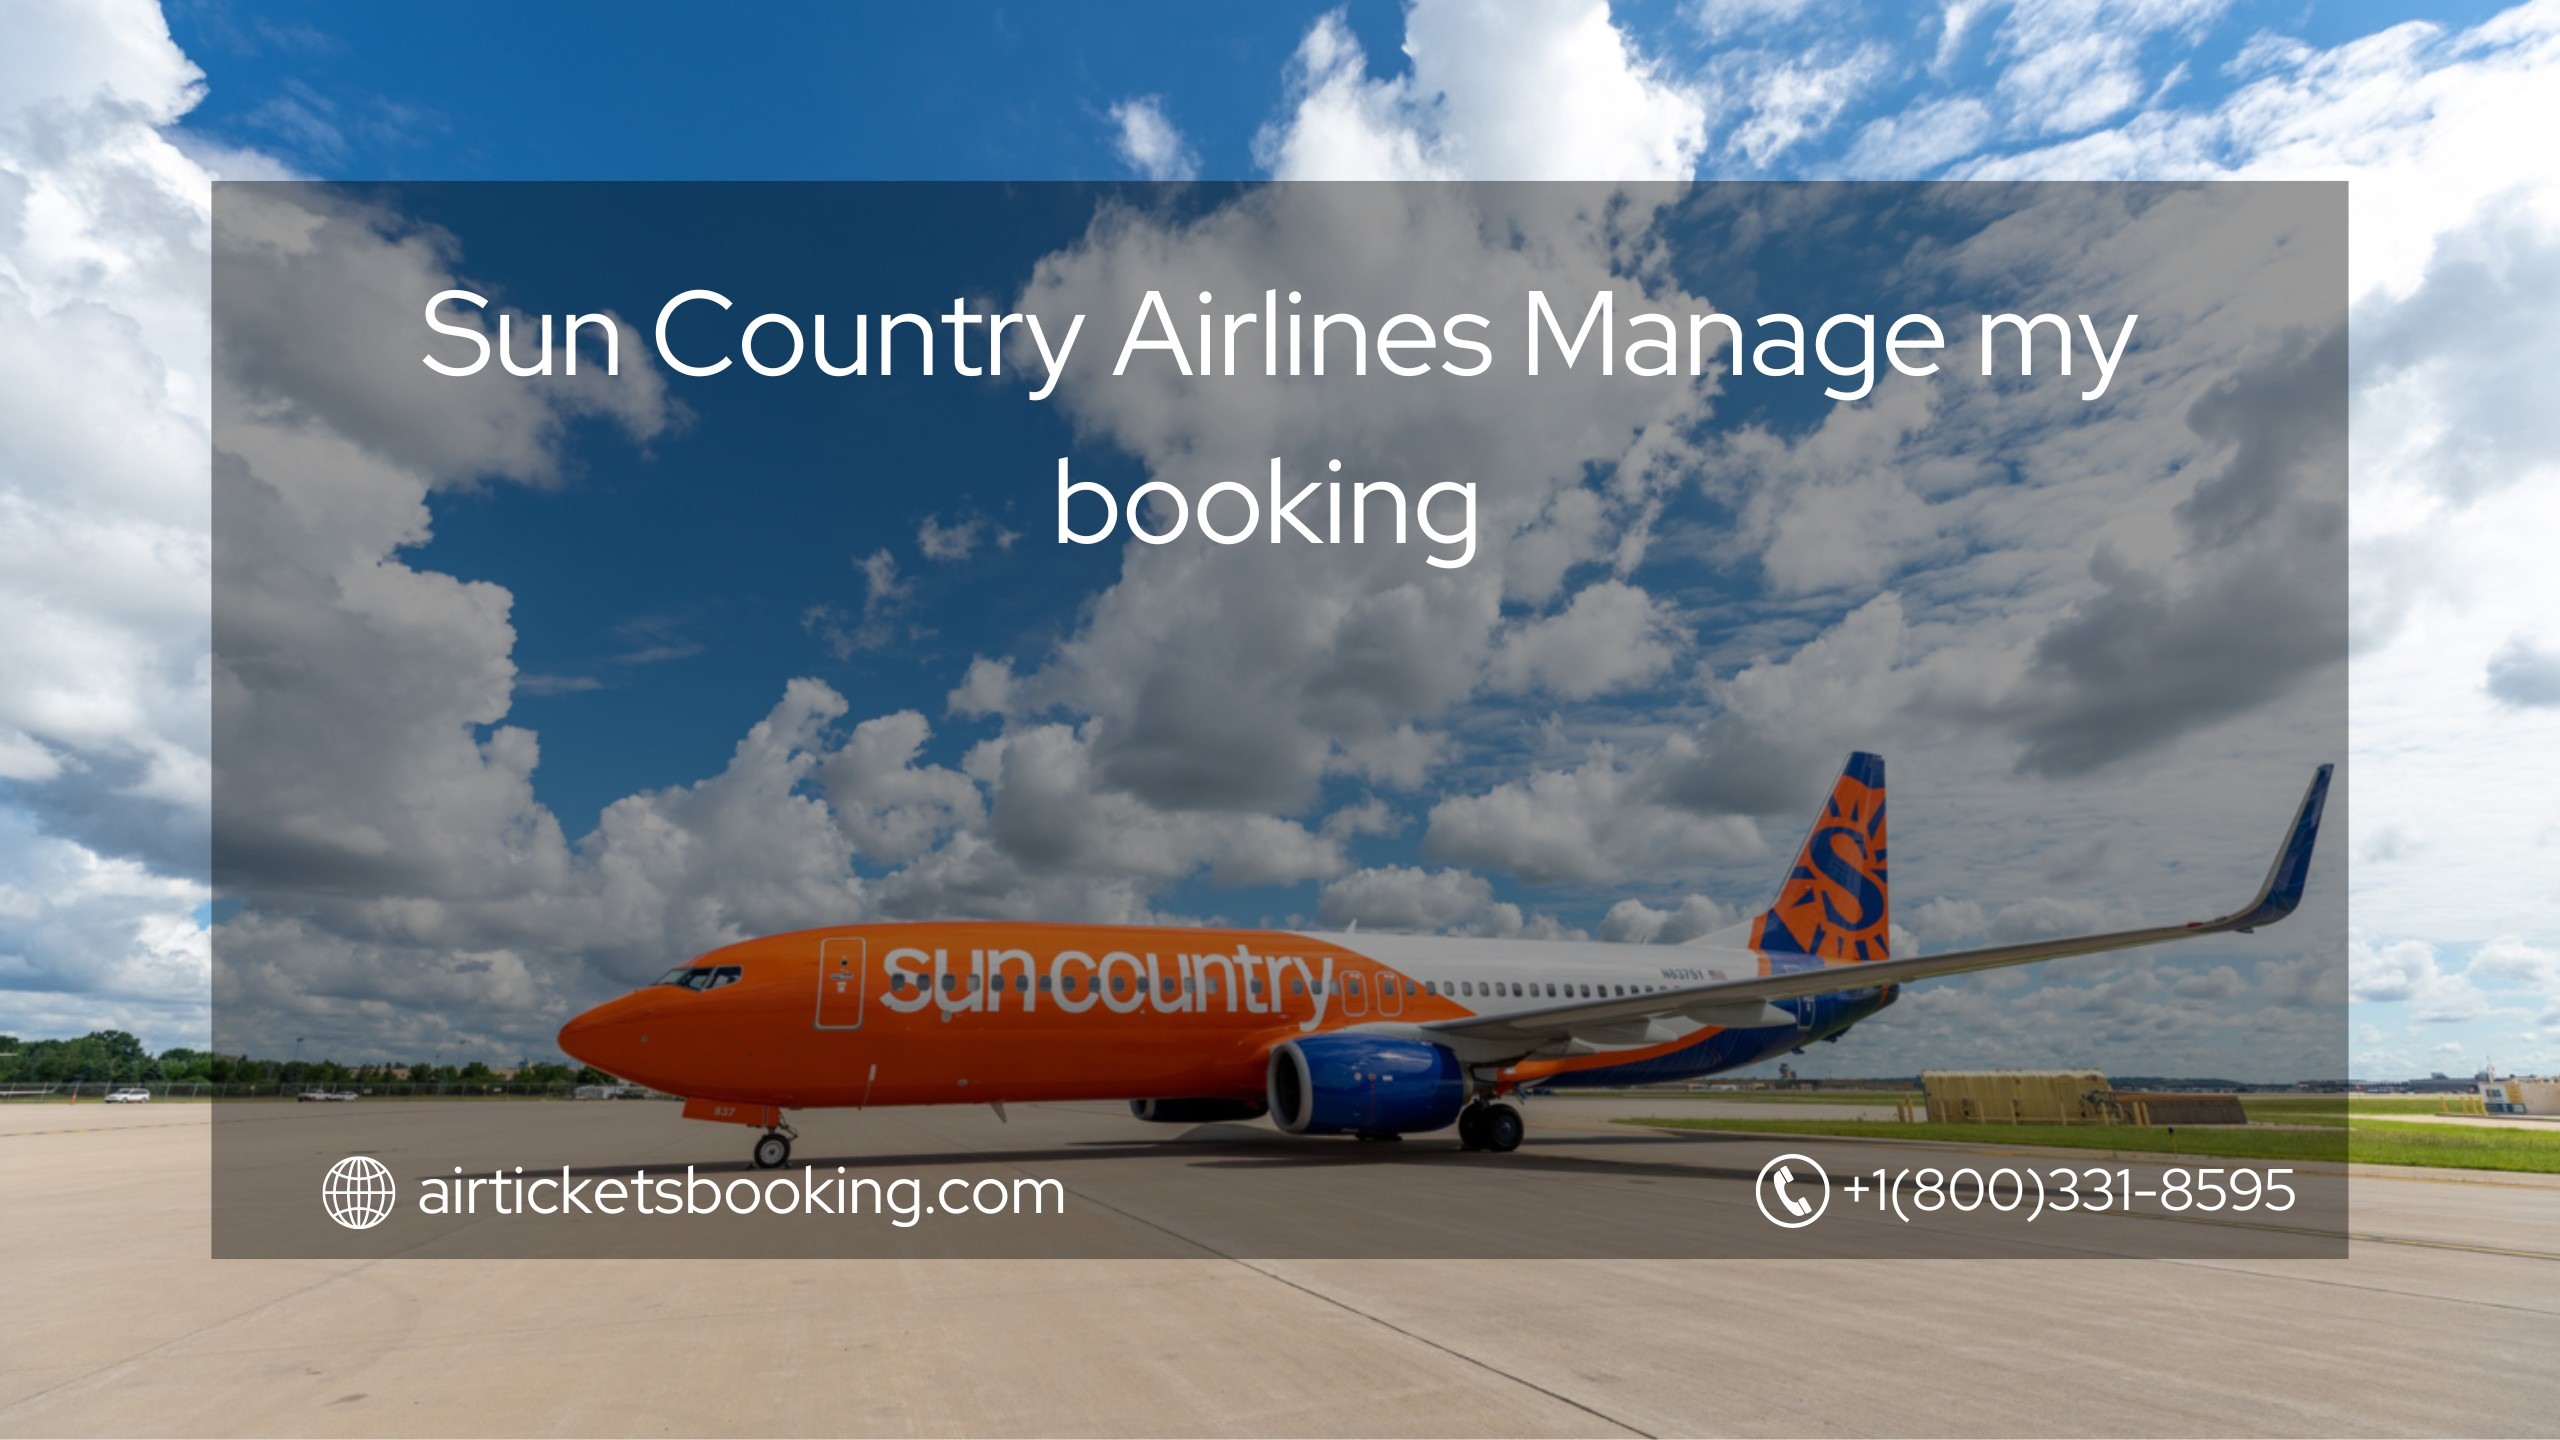 Sun Country Airlines manage my booking 